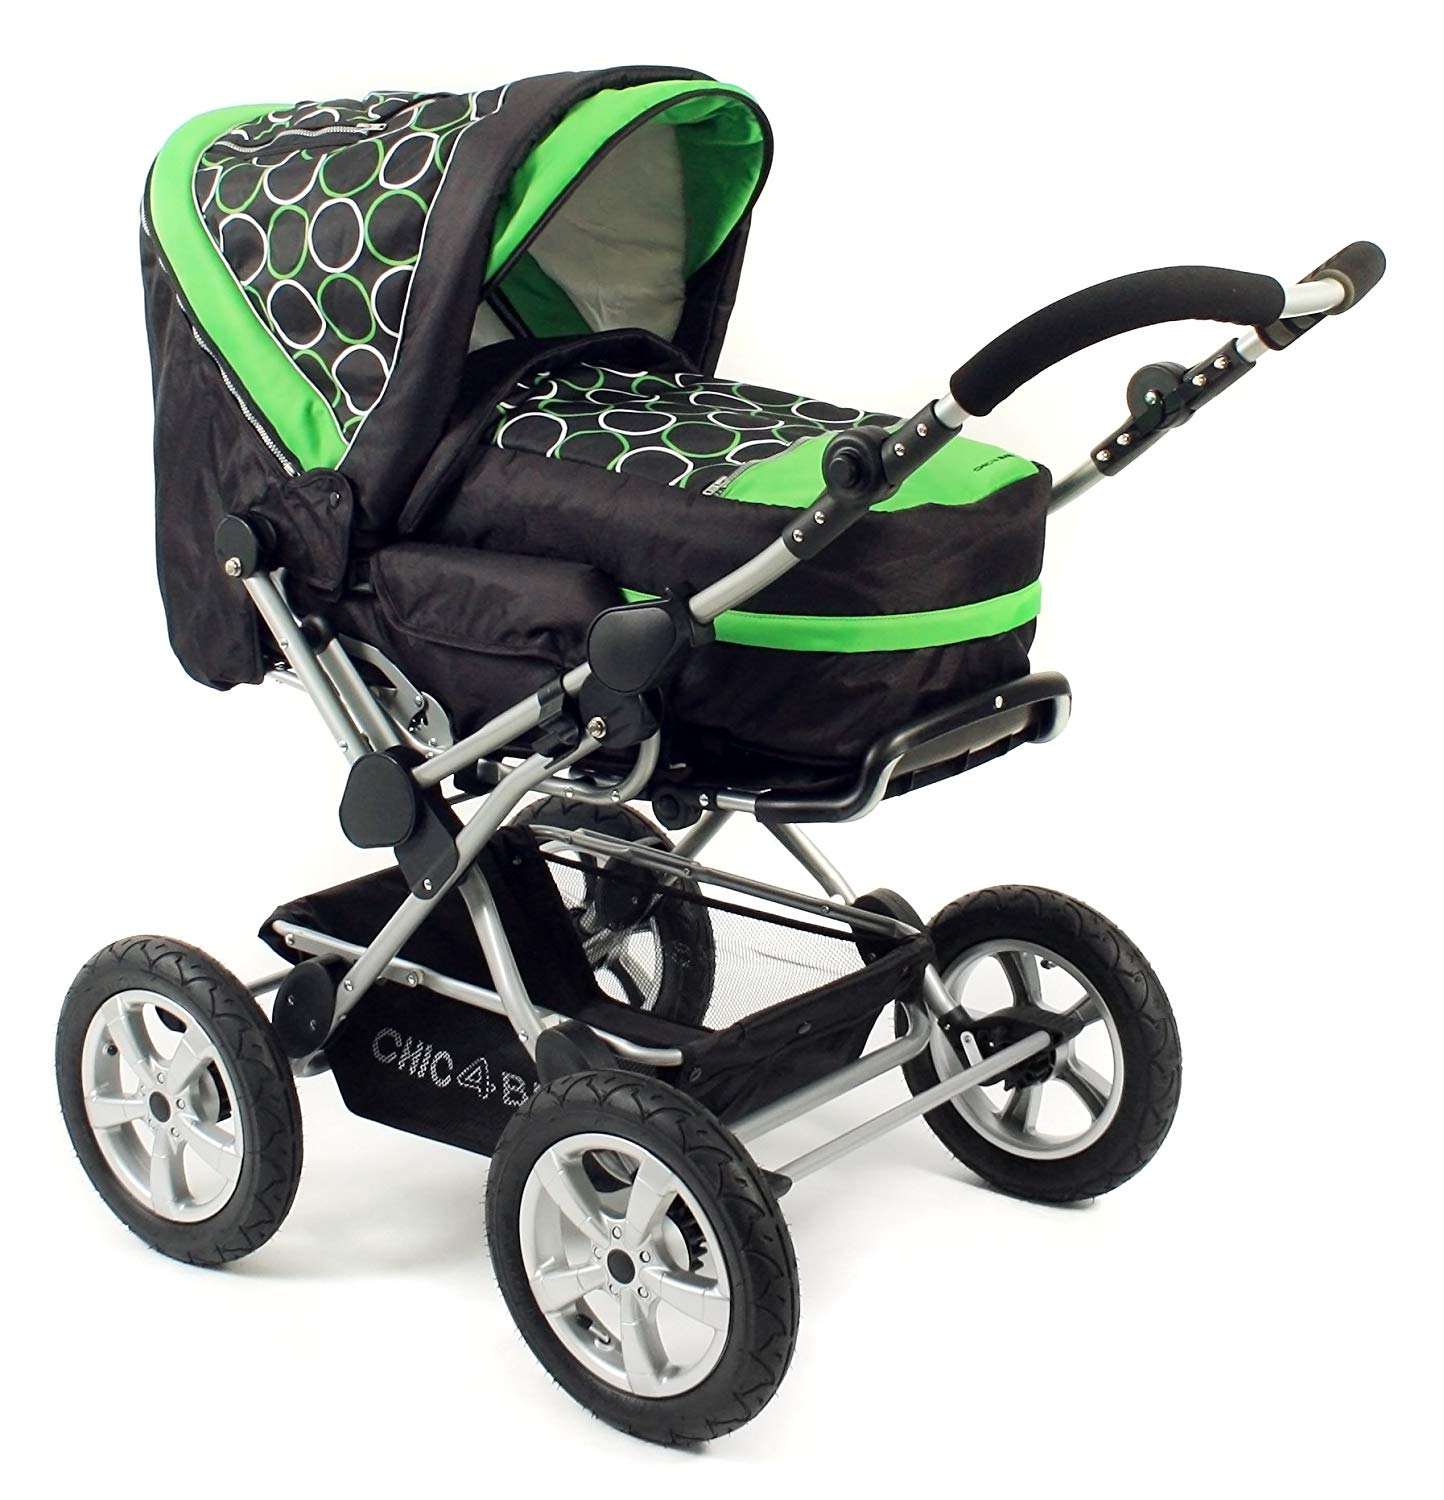 Chic 4 Baby Viva 100 A45 Travel System with Carry Case and Sport Seat Orbit Green